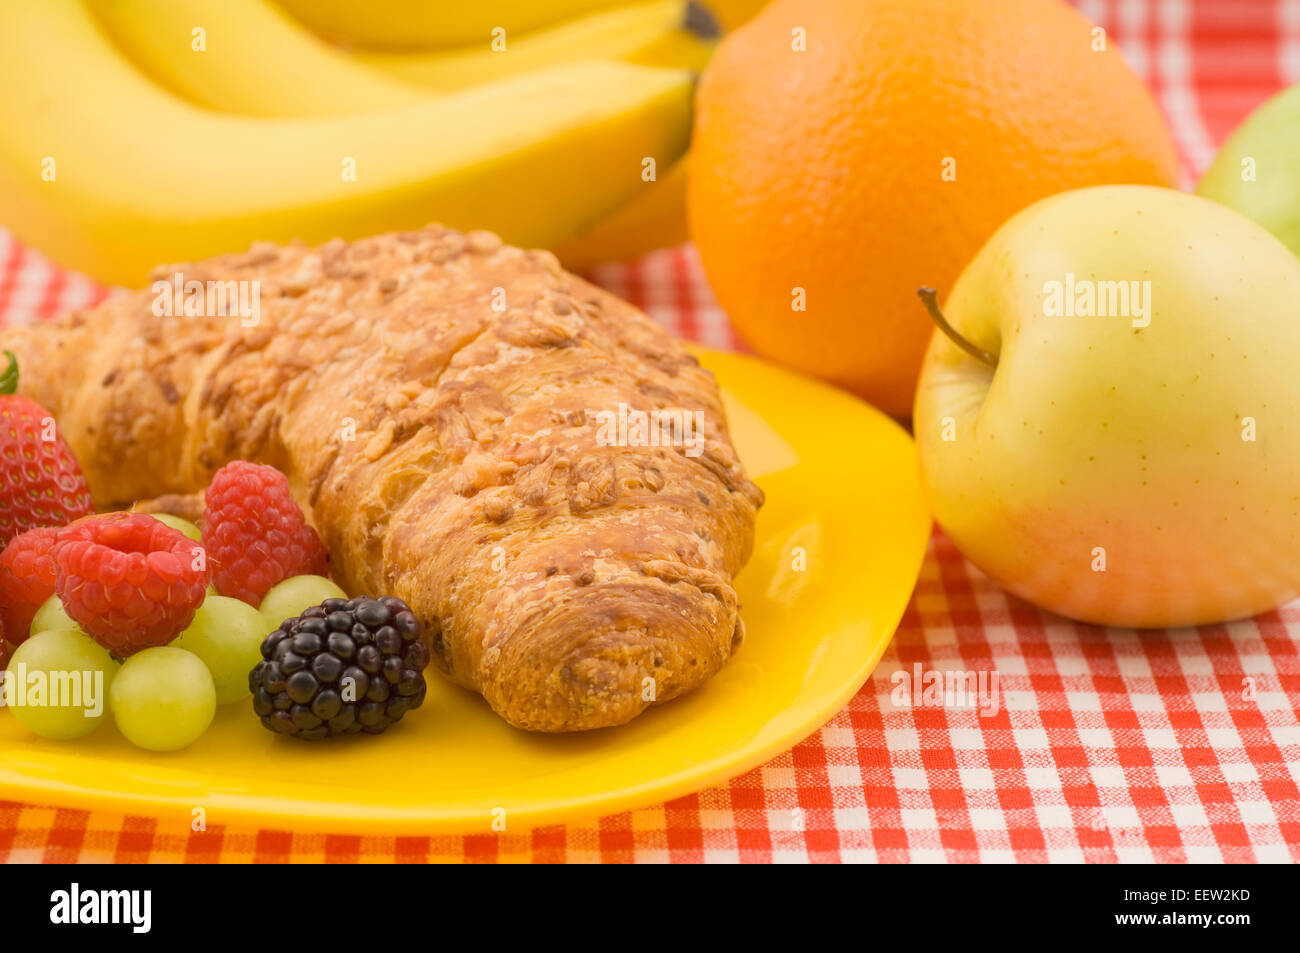 Croissant pastry with fruit garnish Stock Photo